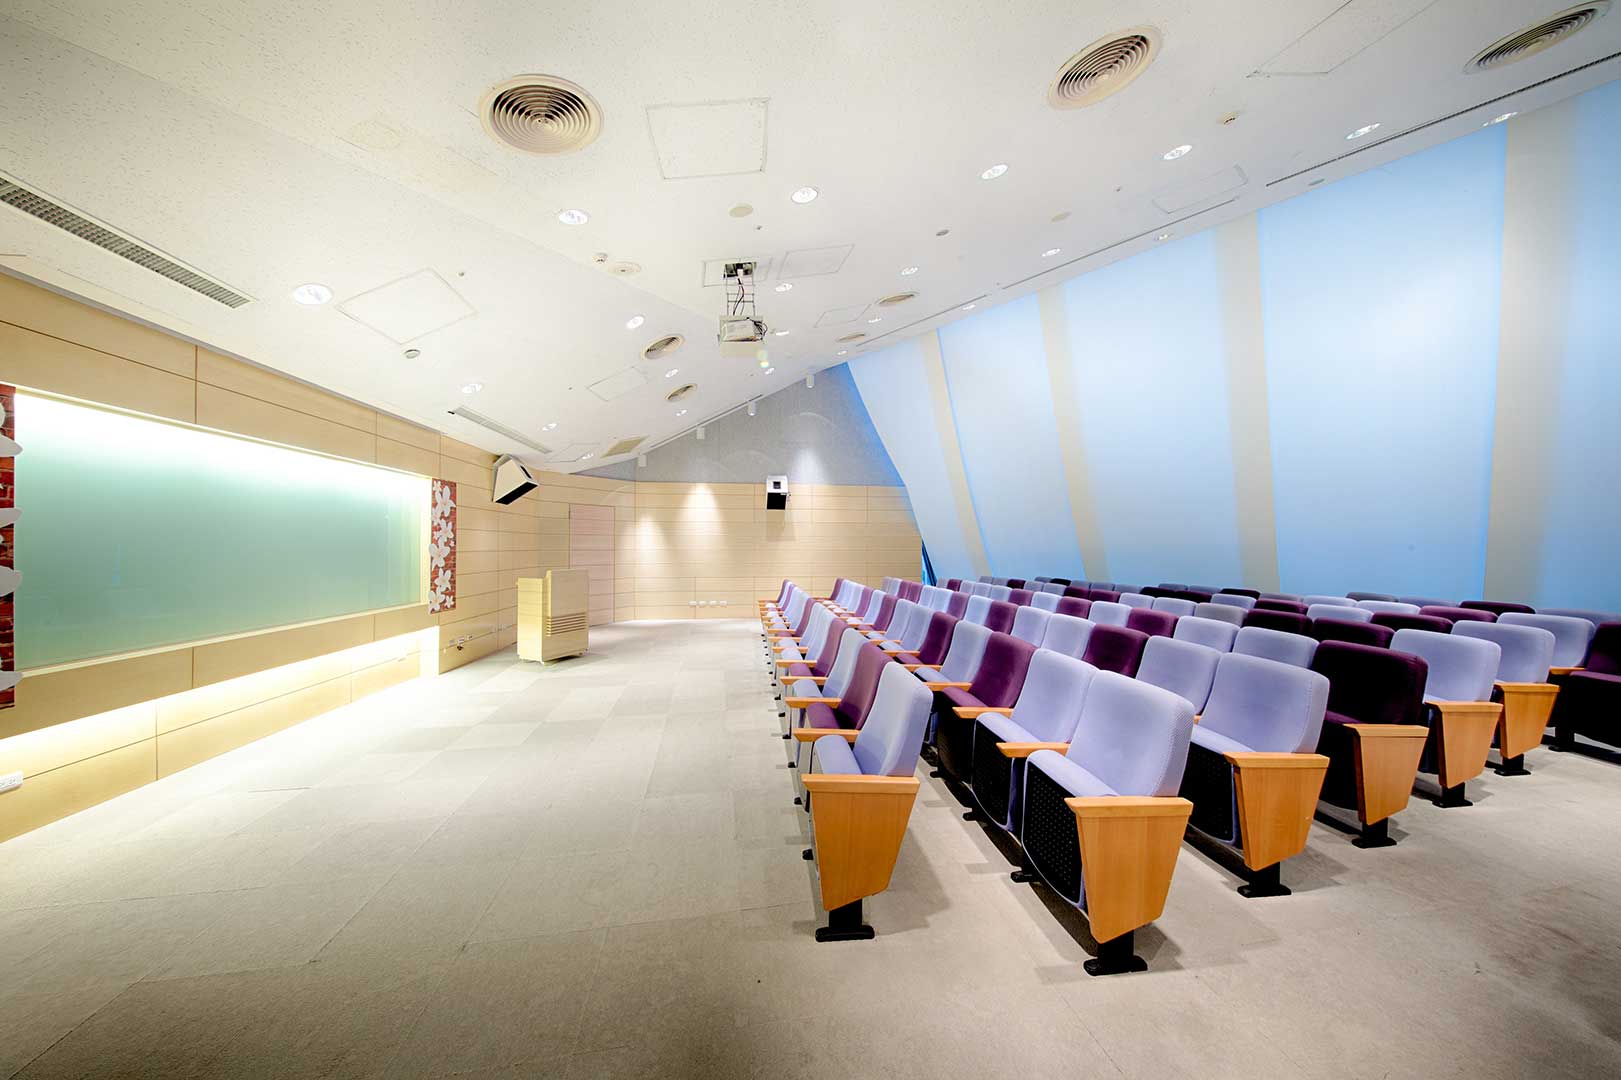 Presentation room podium and approximately 57 seats